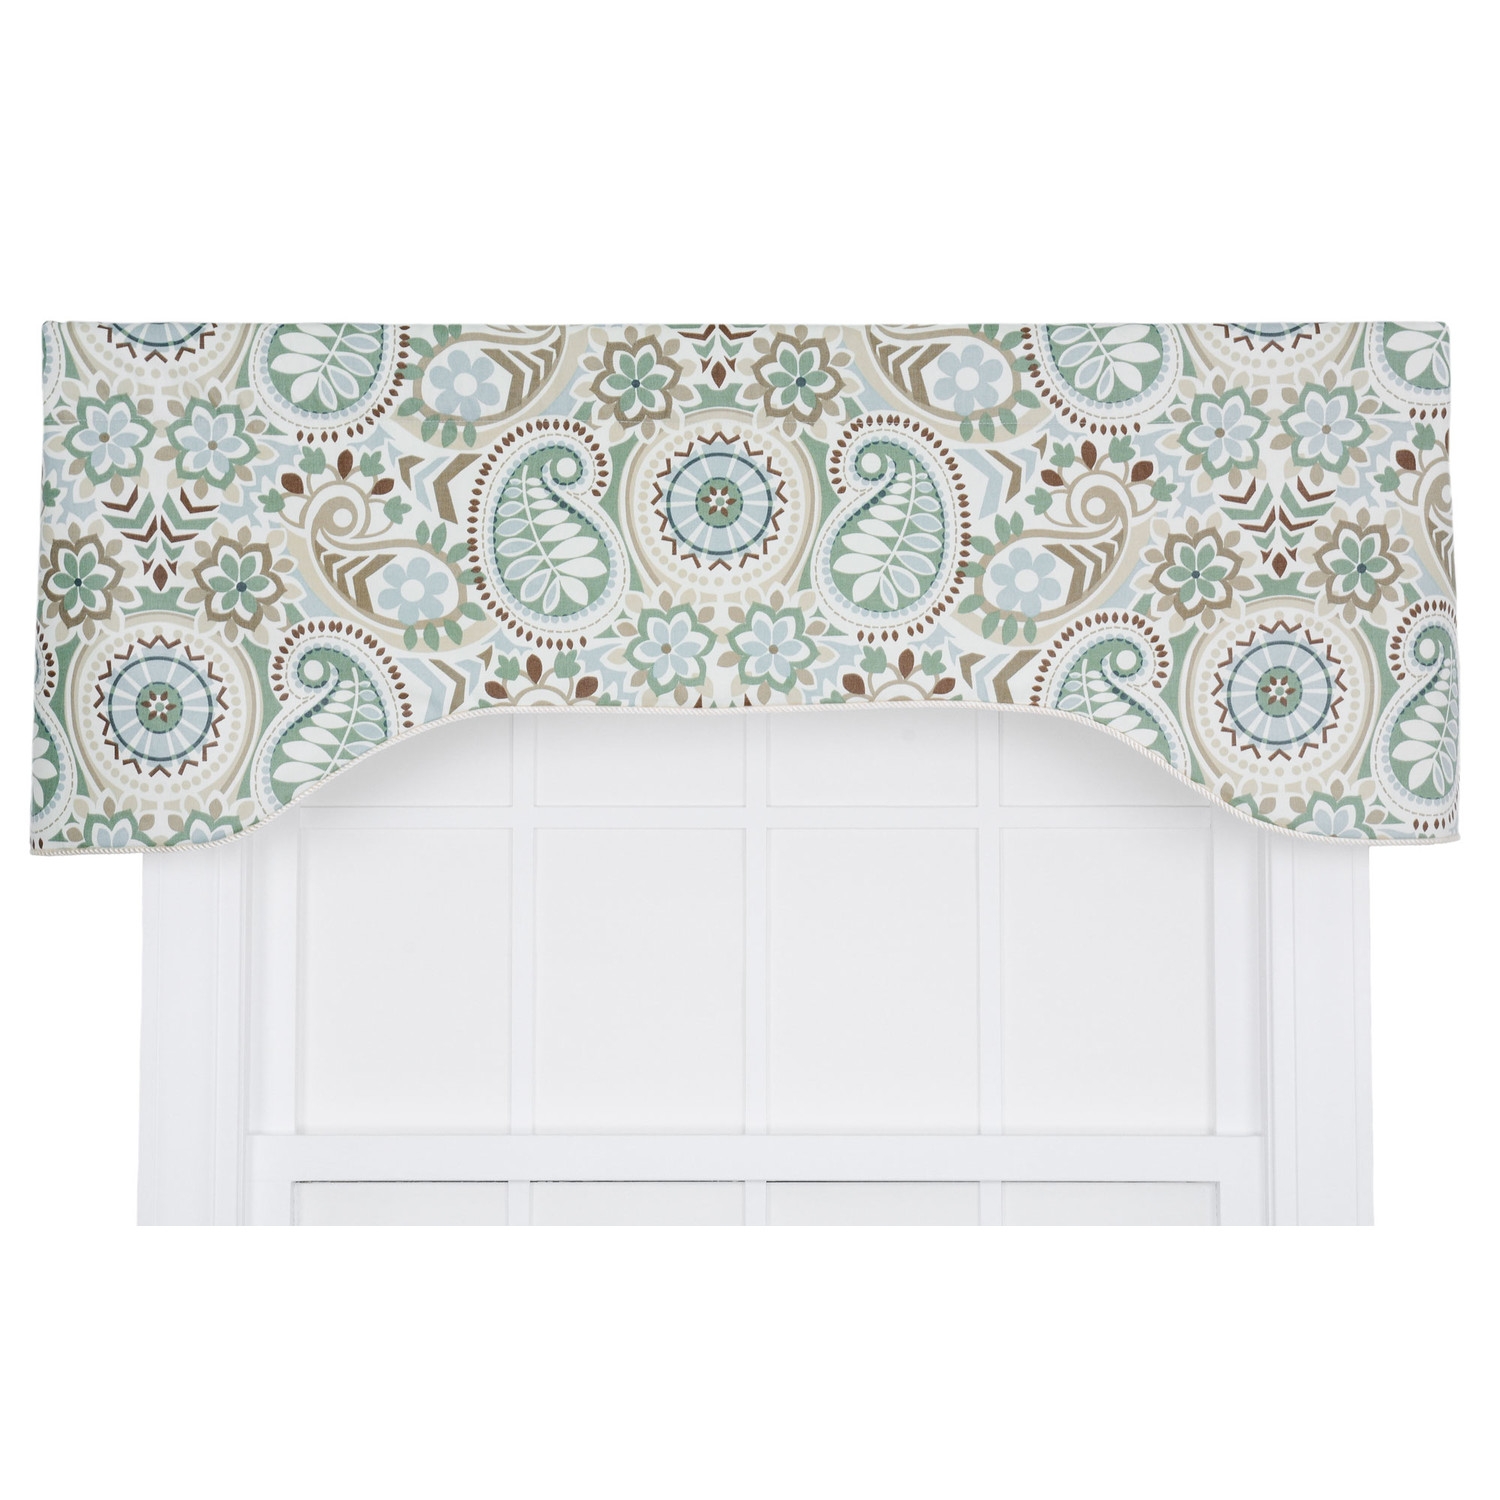 Paisley Prism Jacobean Floral Print Lined Arched Curtain Valance - Image 0